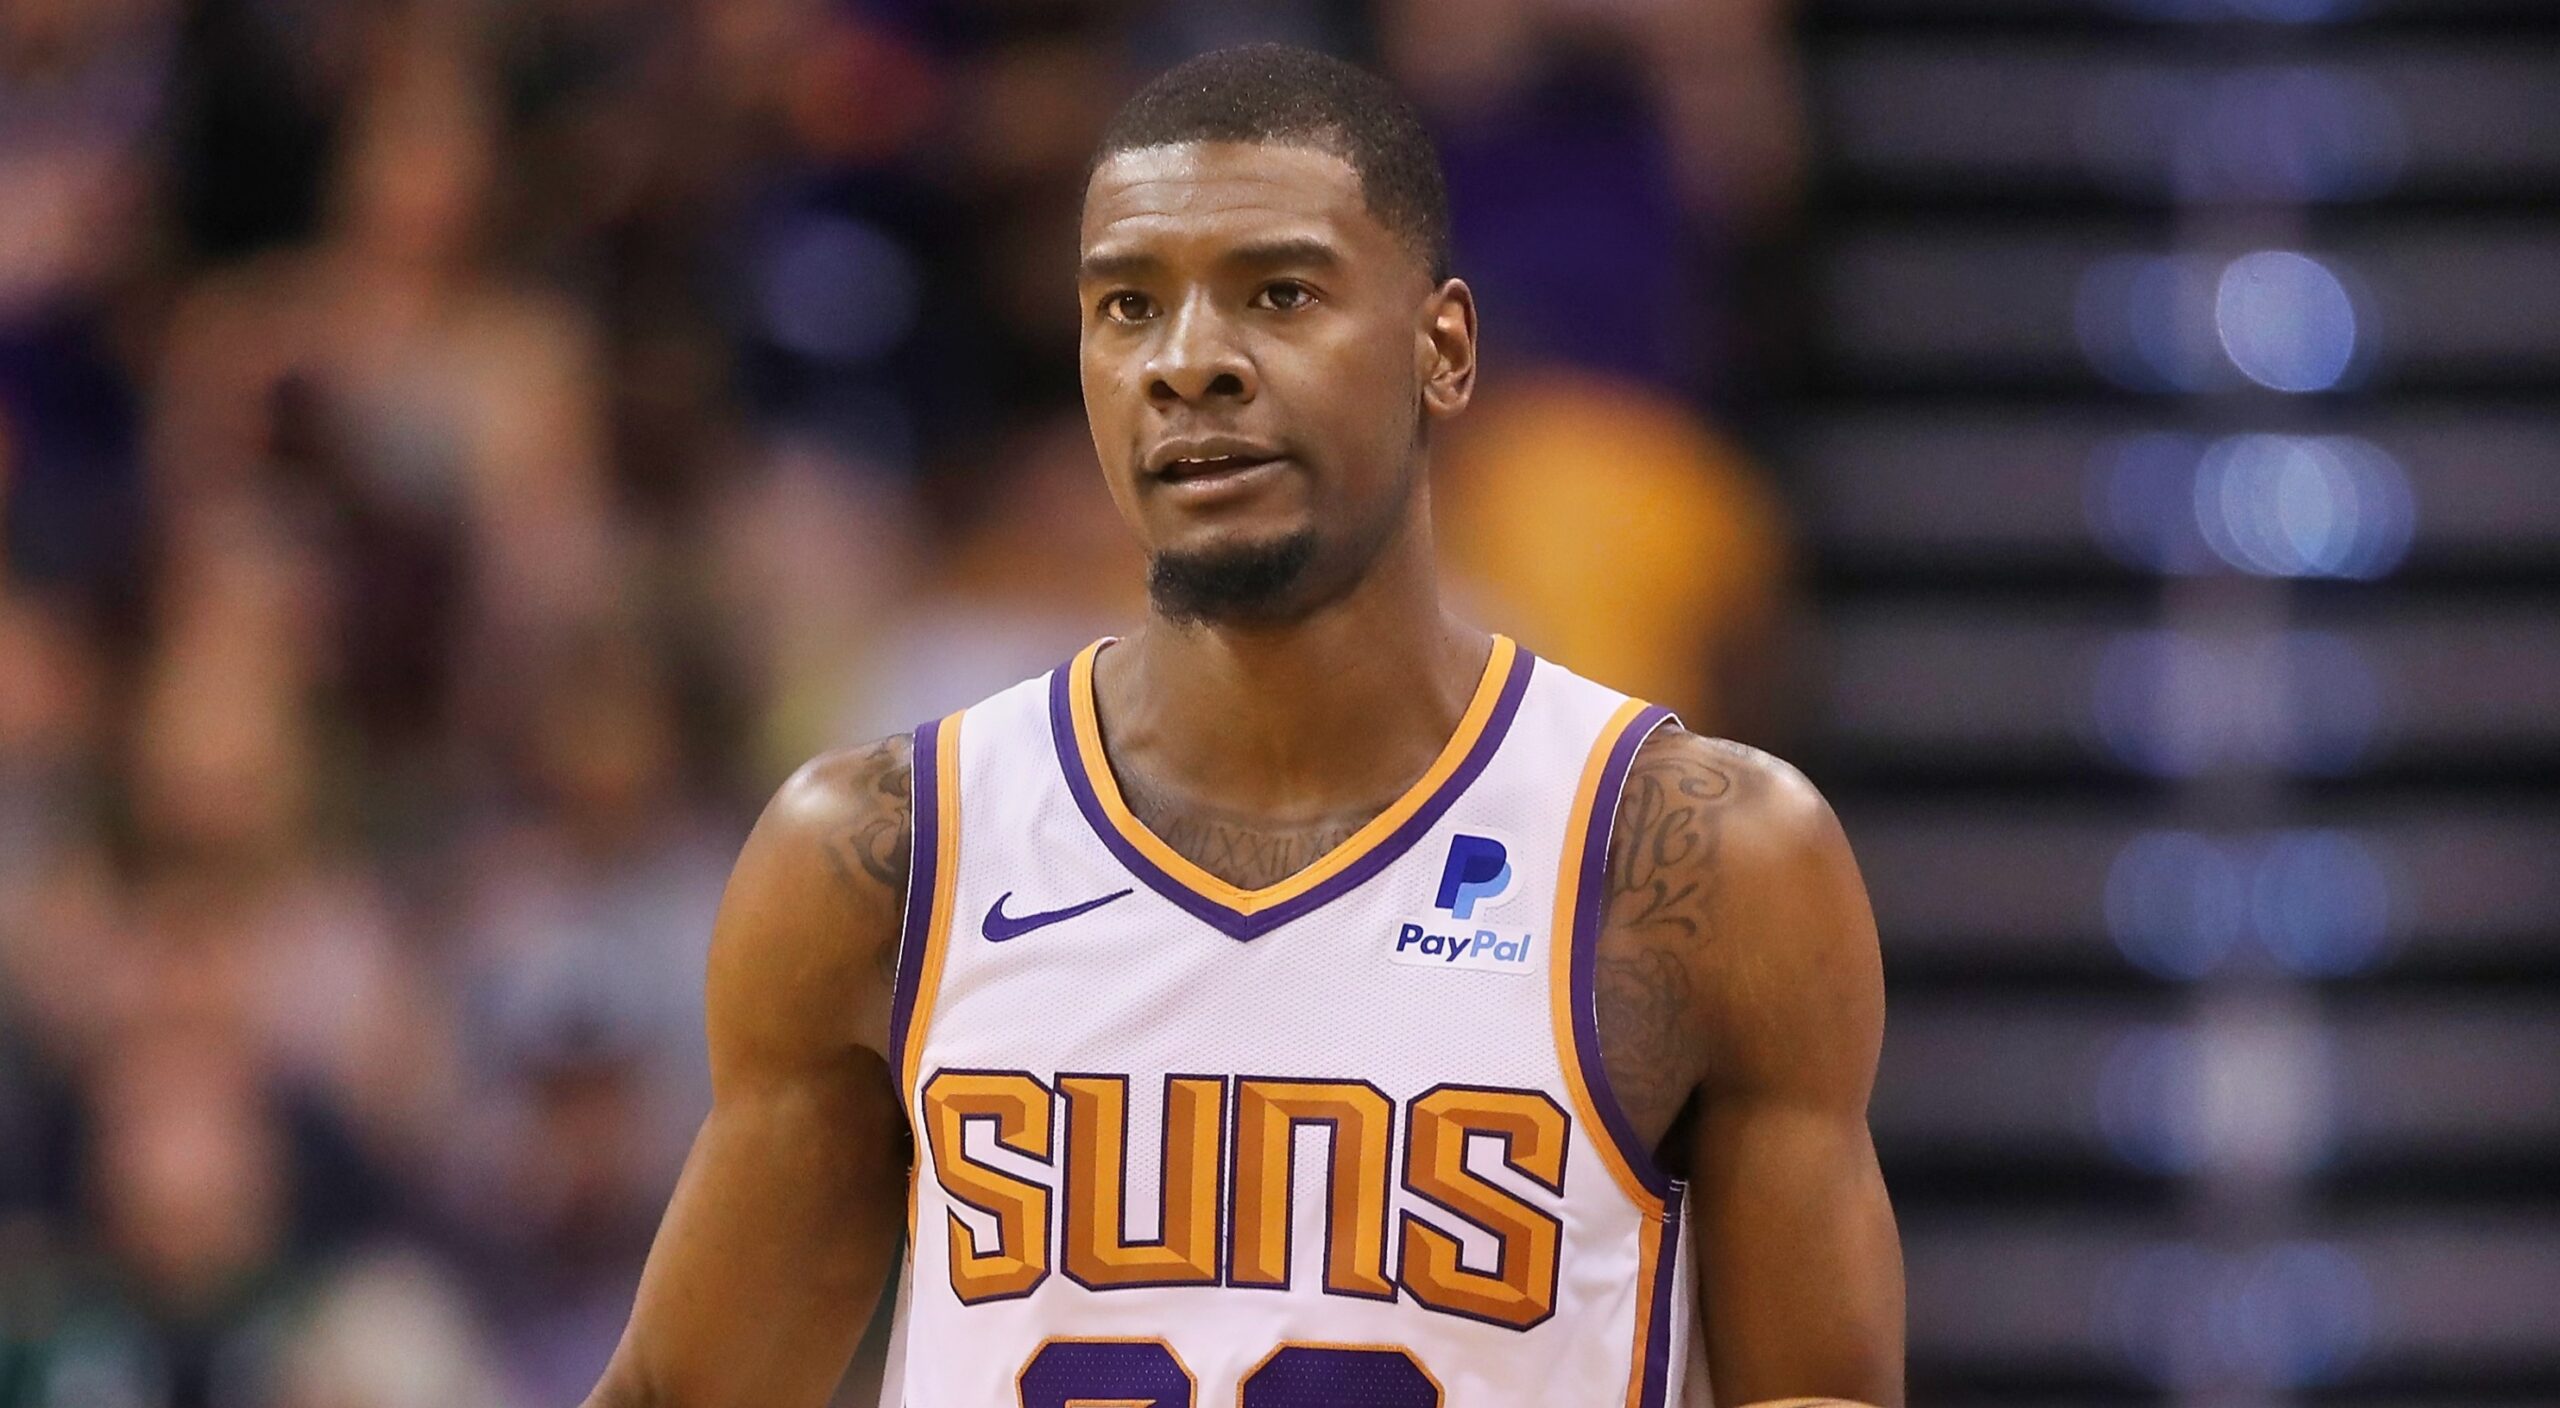 Suns Send Deandre Ayton To Rival Powerhouse In Trade Proposal